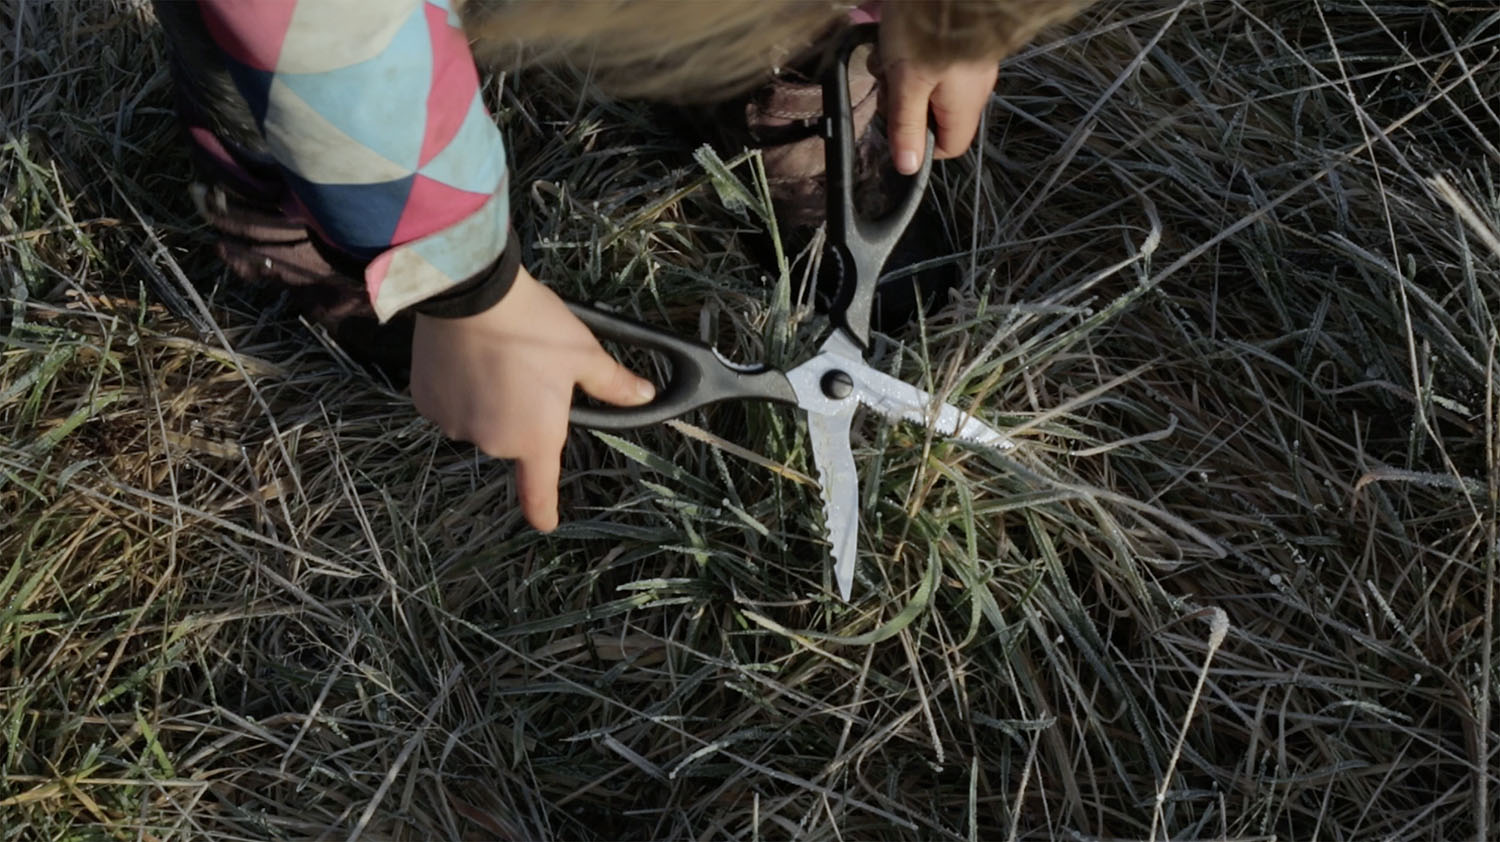 If play is neither inside nor outside where is it?, video still, child cutting grass with scissors